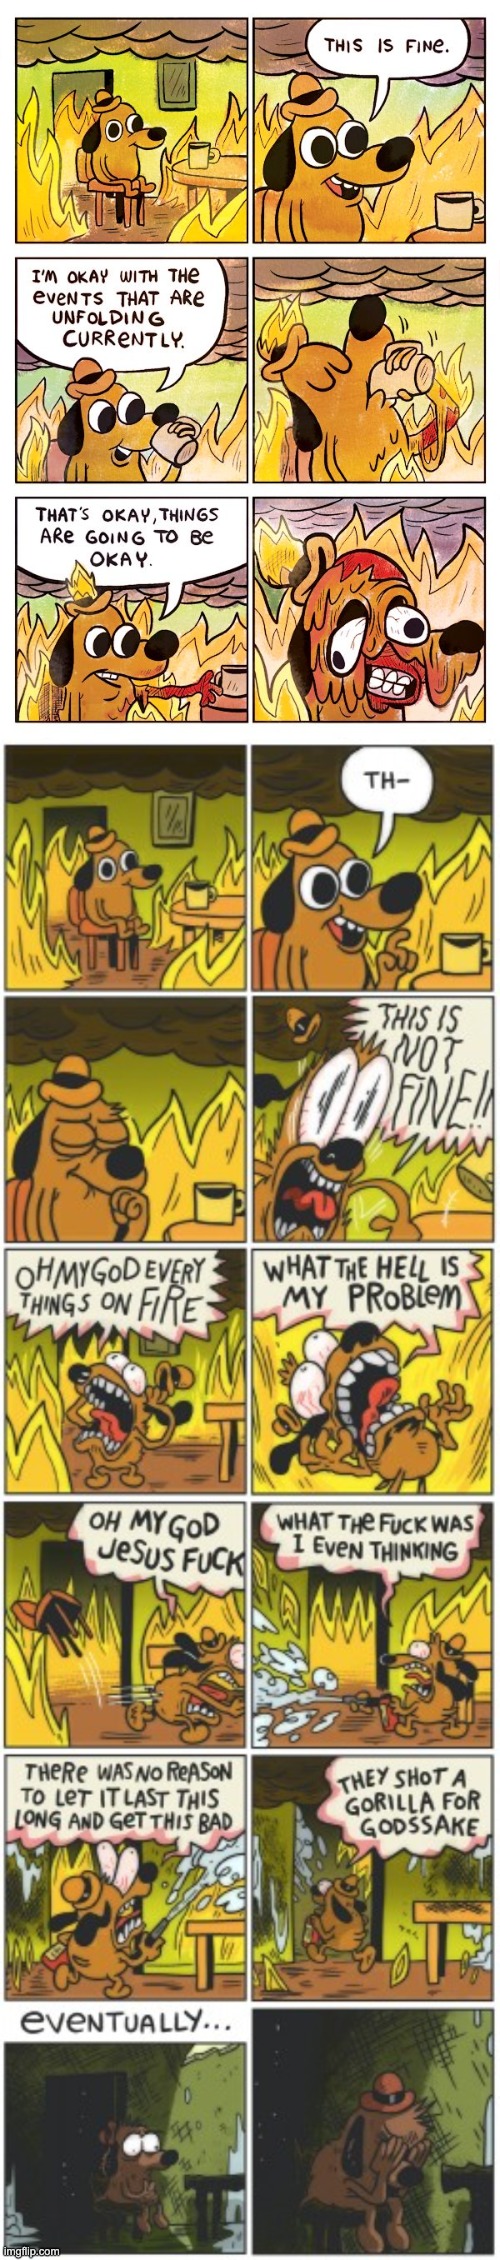 image tagged in this is fine dog,this is not fine | made w/ Imgflip meme maker